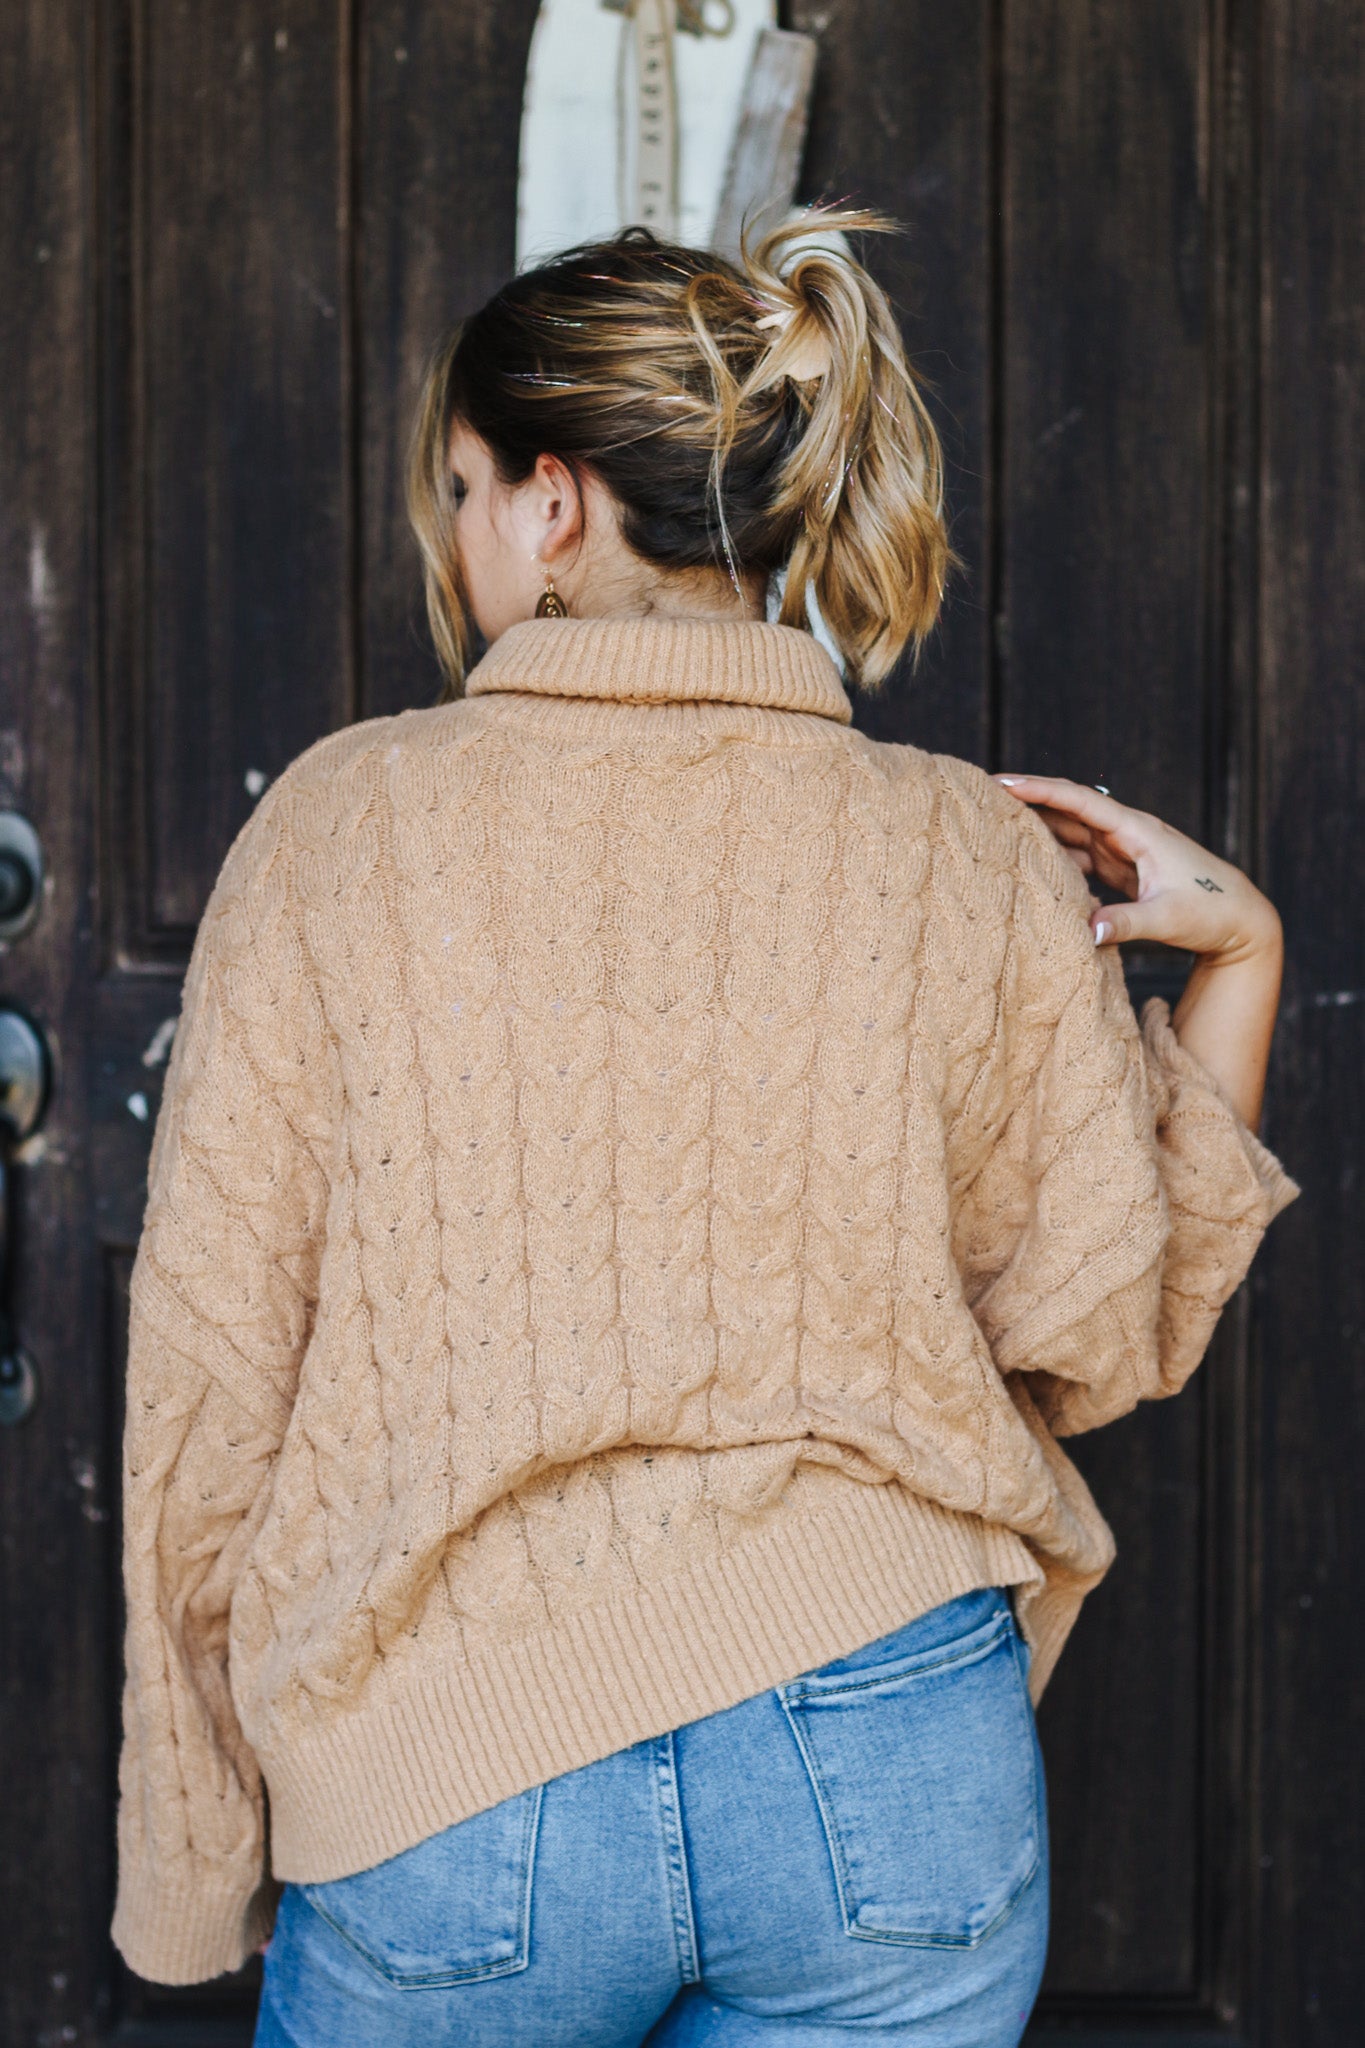 Radley Cable Knit Tan Sweater